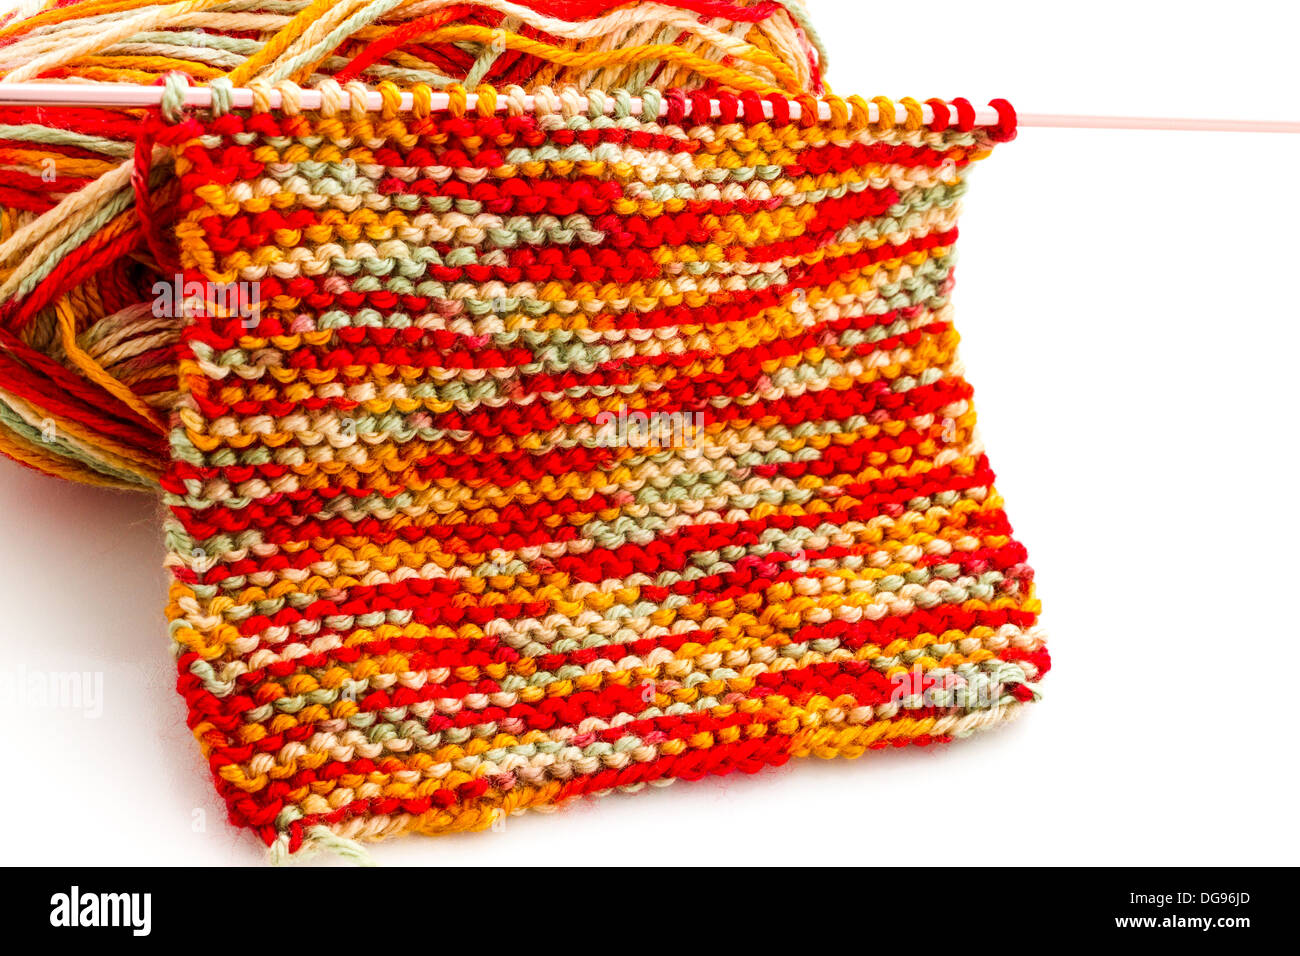 Knitting with multi colored yarn with orange, red, and yellow tones Stock  Photo - Alamy